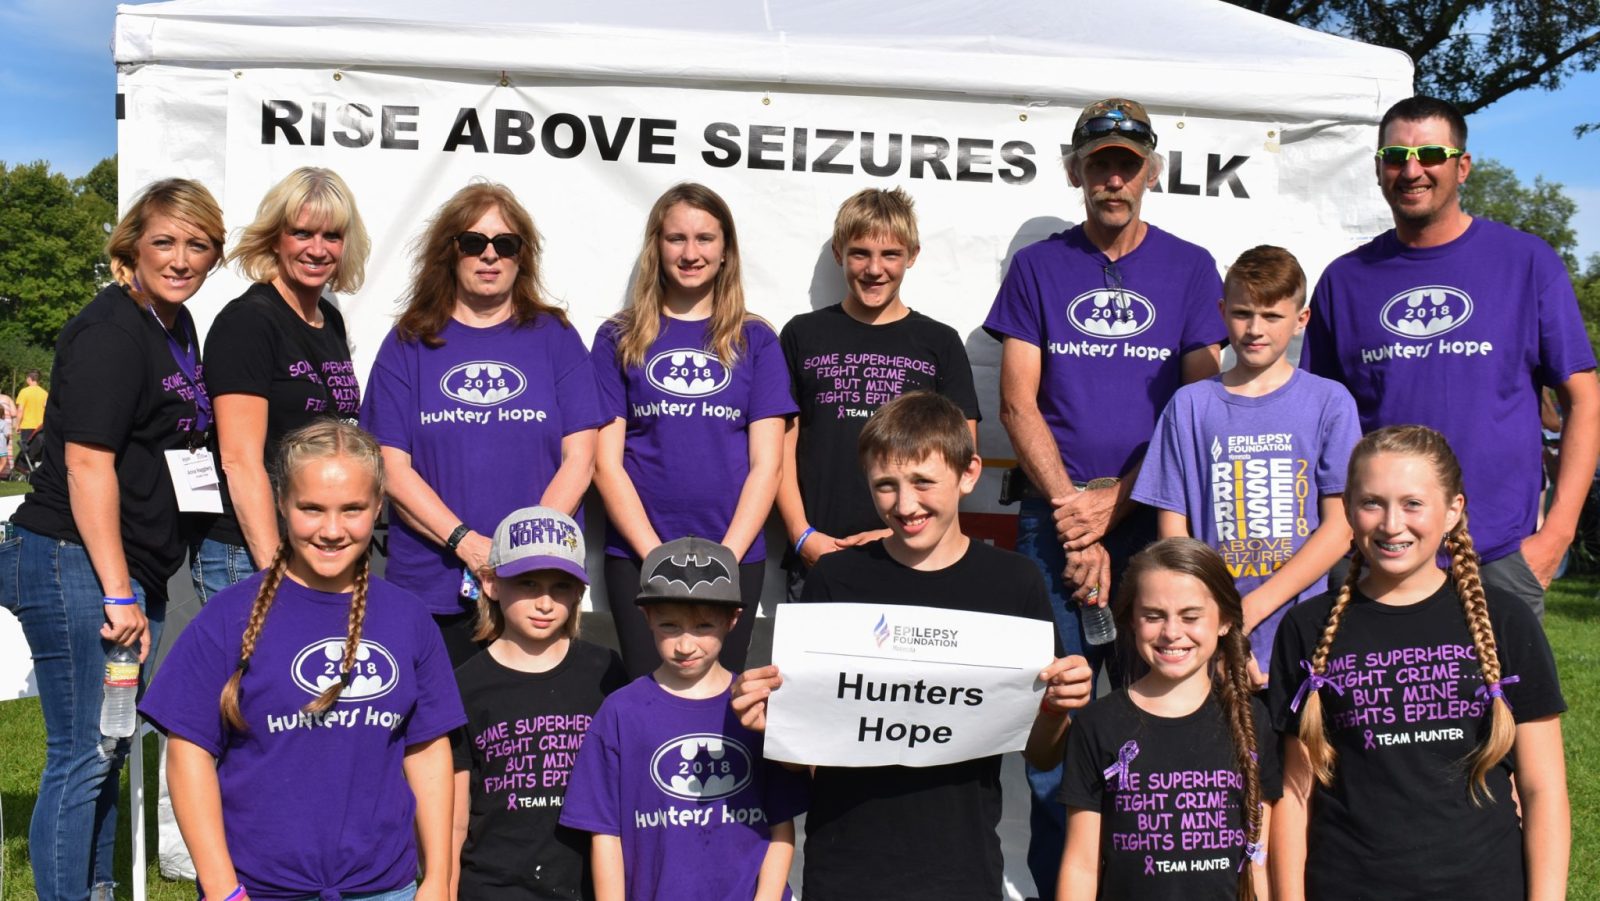 Group of 14 people of all ages smiling at Rise Above Seizures Walk